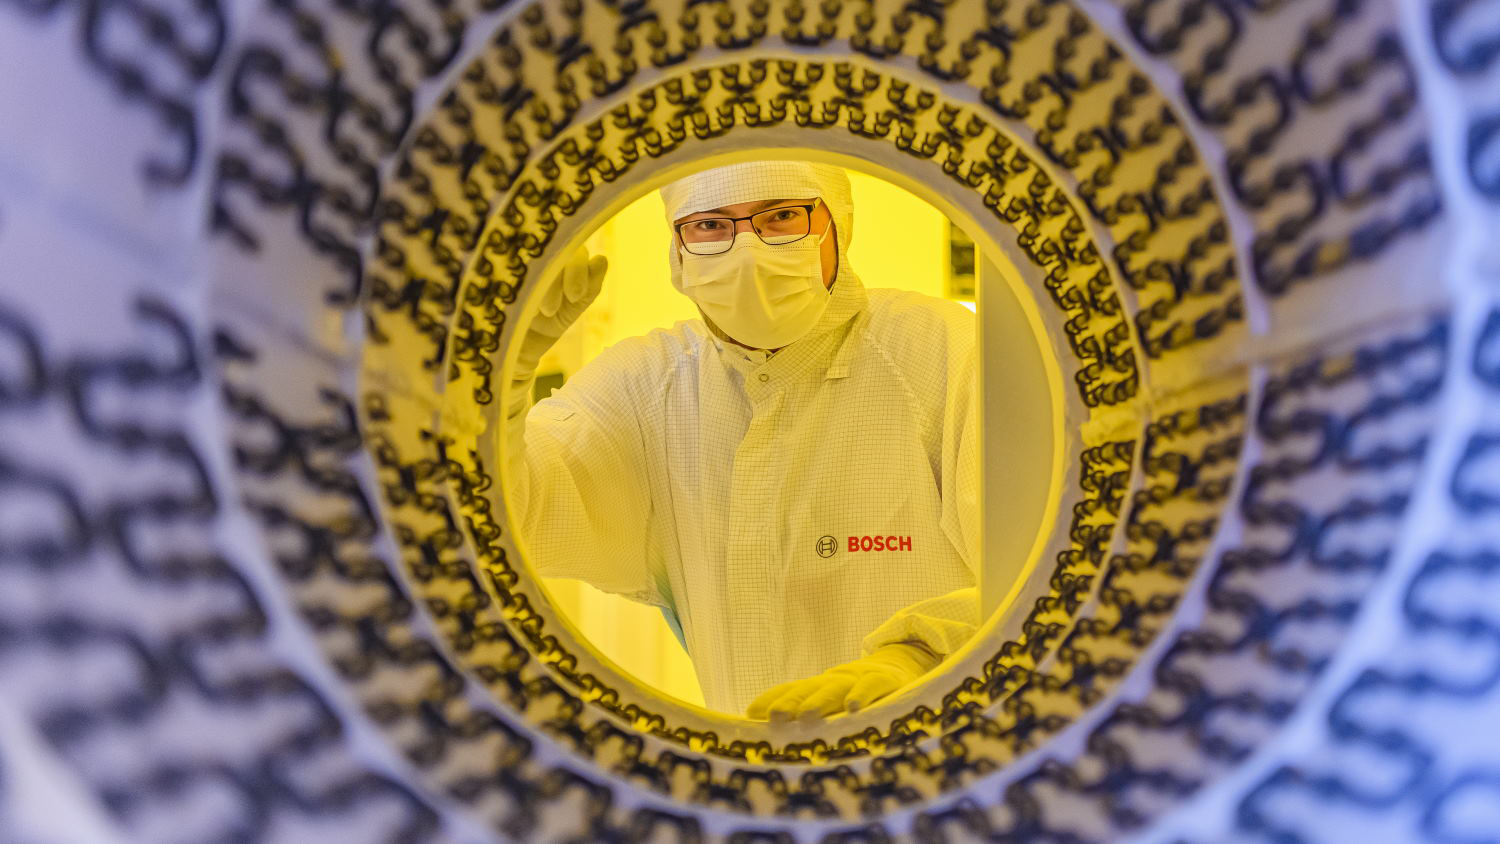 “Invented for life” with semiconductors:  Bosch invests further billions in chip business